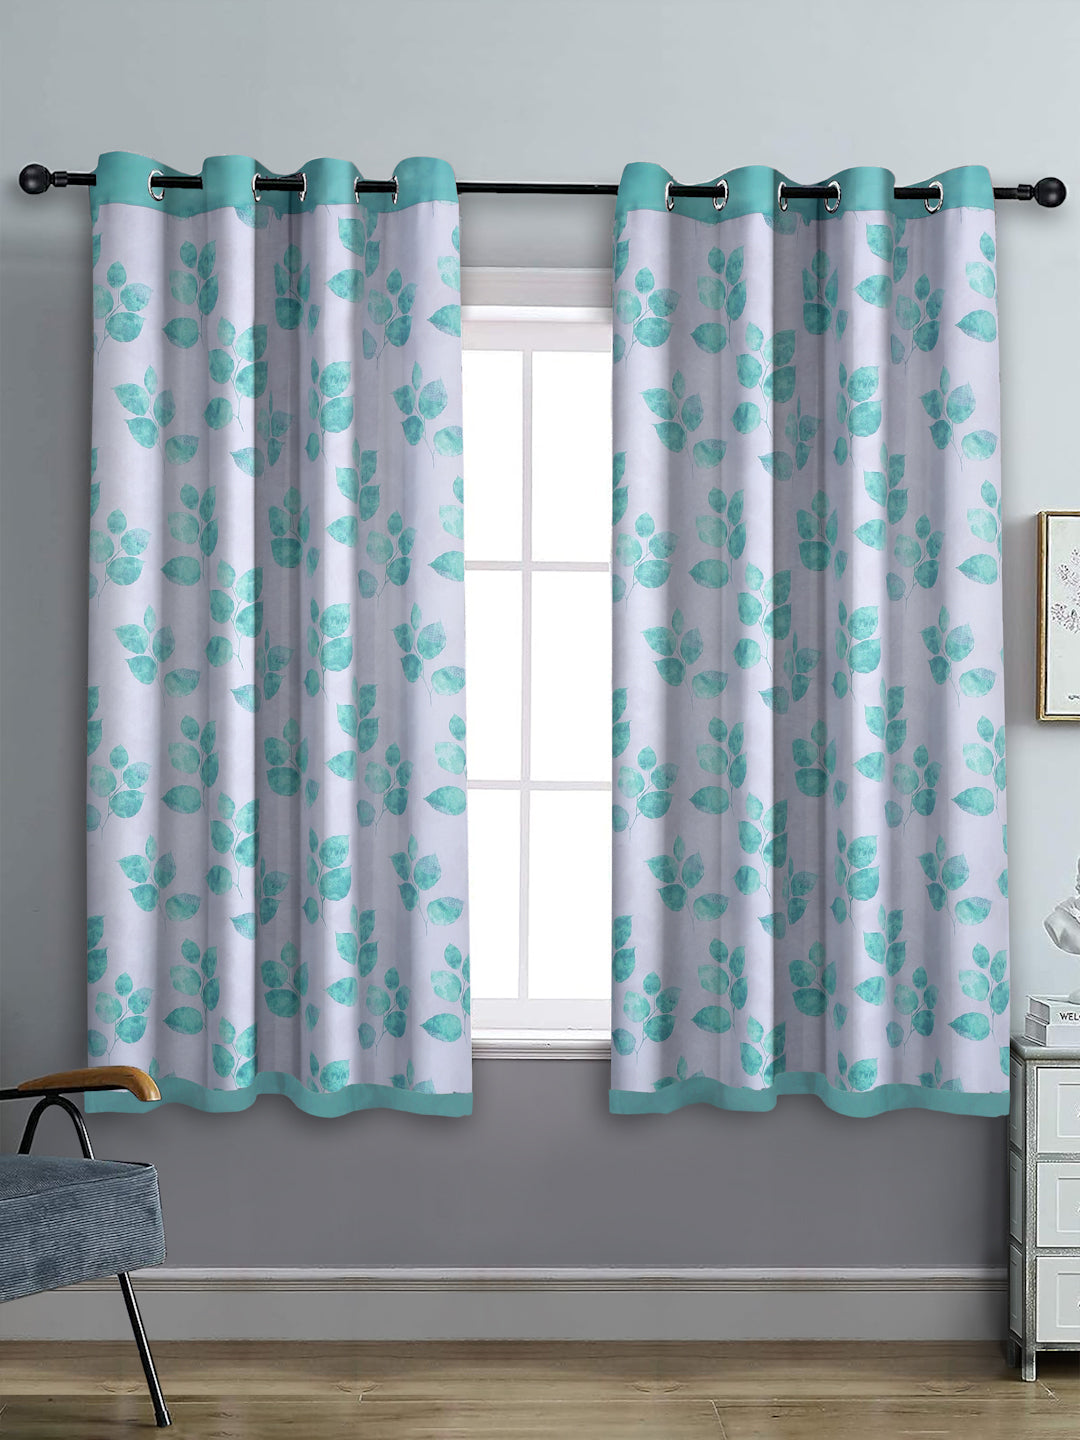 Reversible Floral Printed Blackout Curtains Set of 2- Turquoise